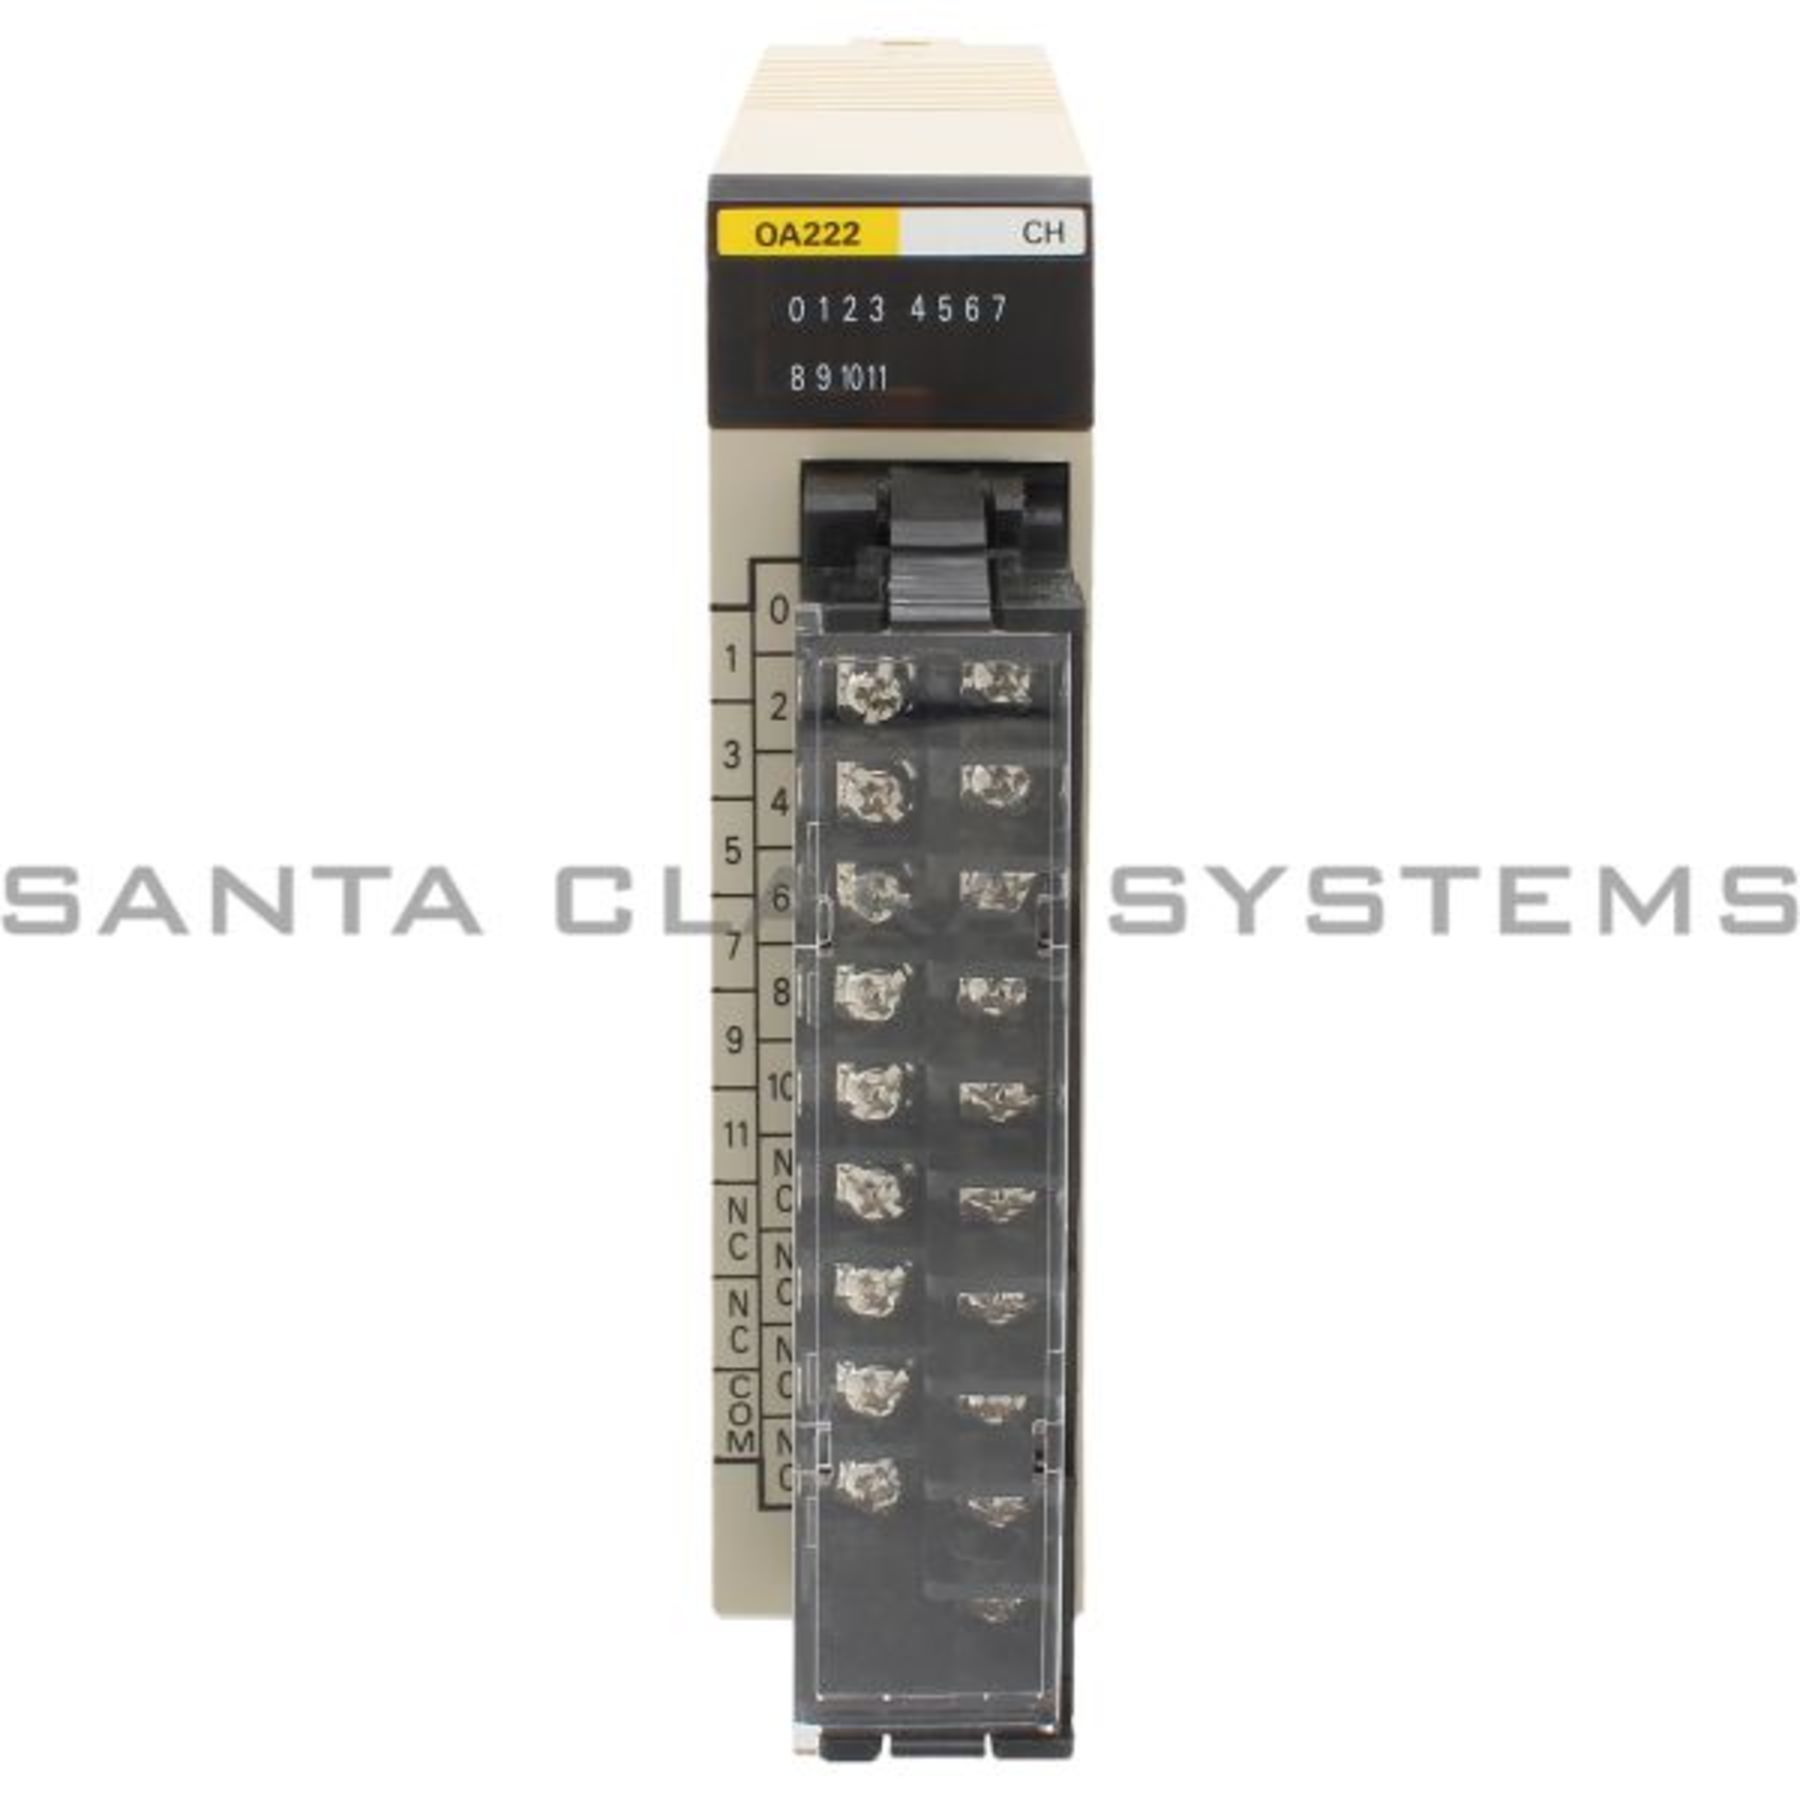 C200H-OA222 Omron In stock and ready to ship - Santa Clara Systems